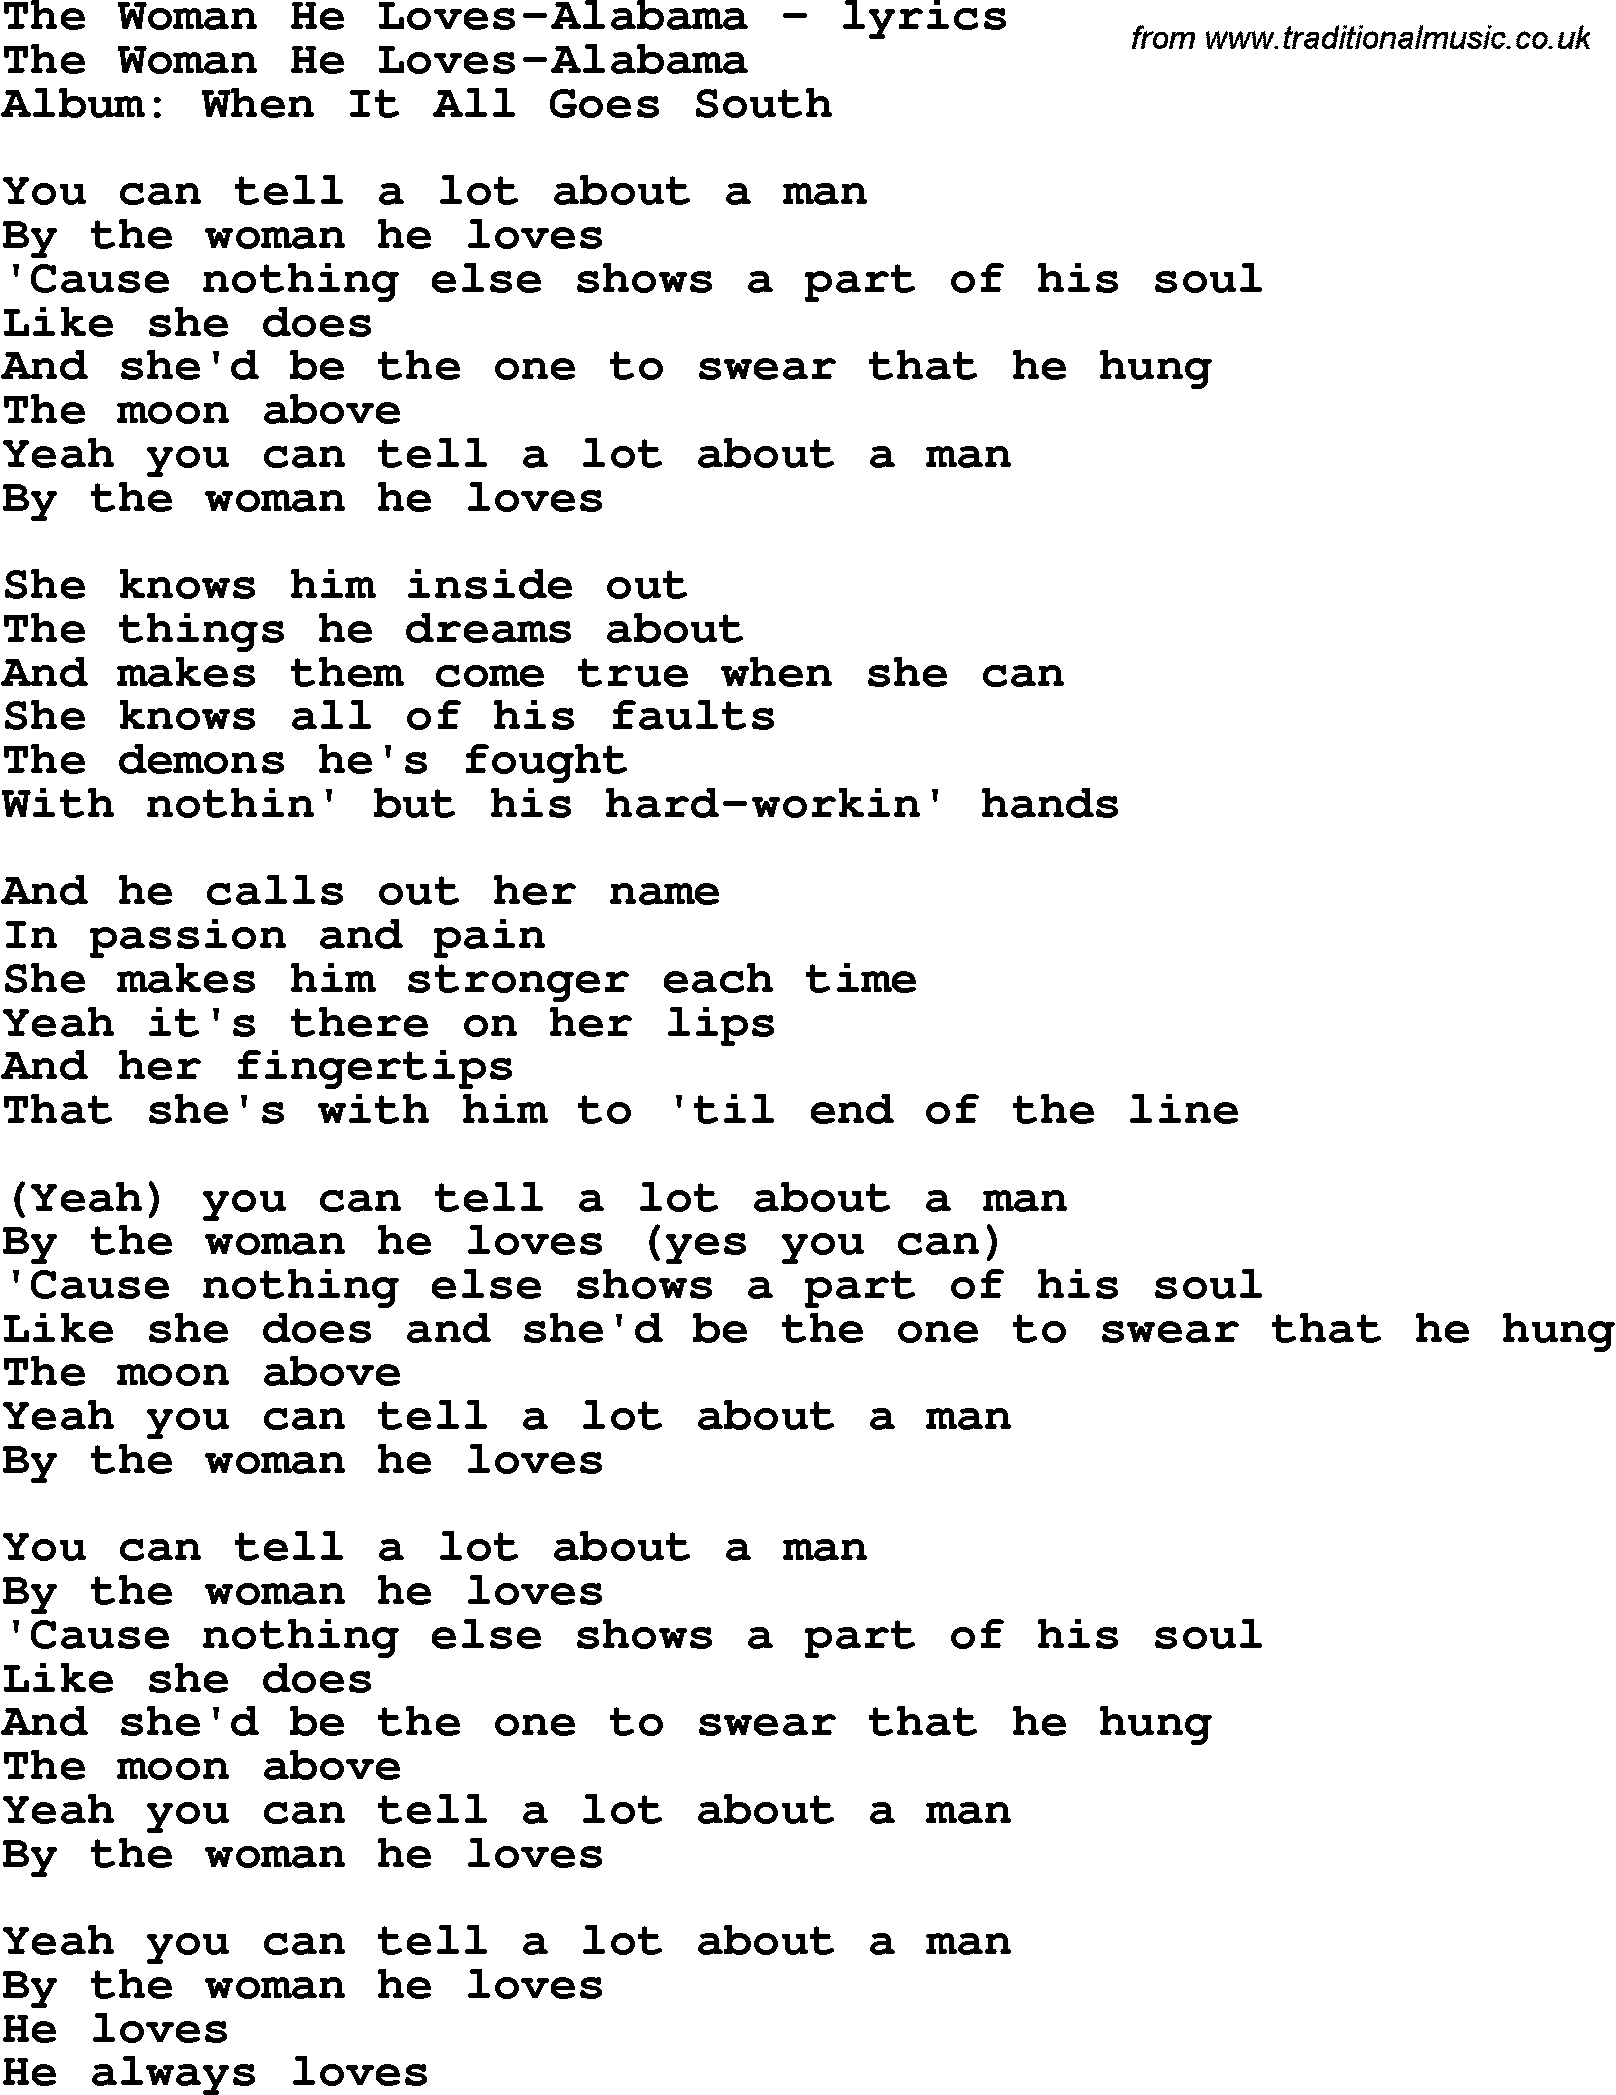 Love Song Lyrics for: The Woman He Loves-Alabama